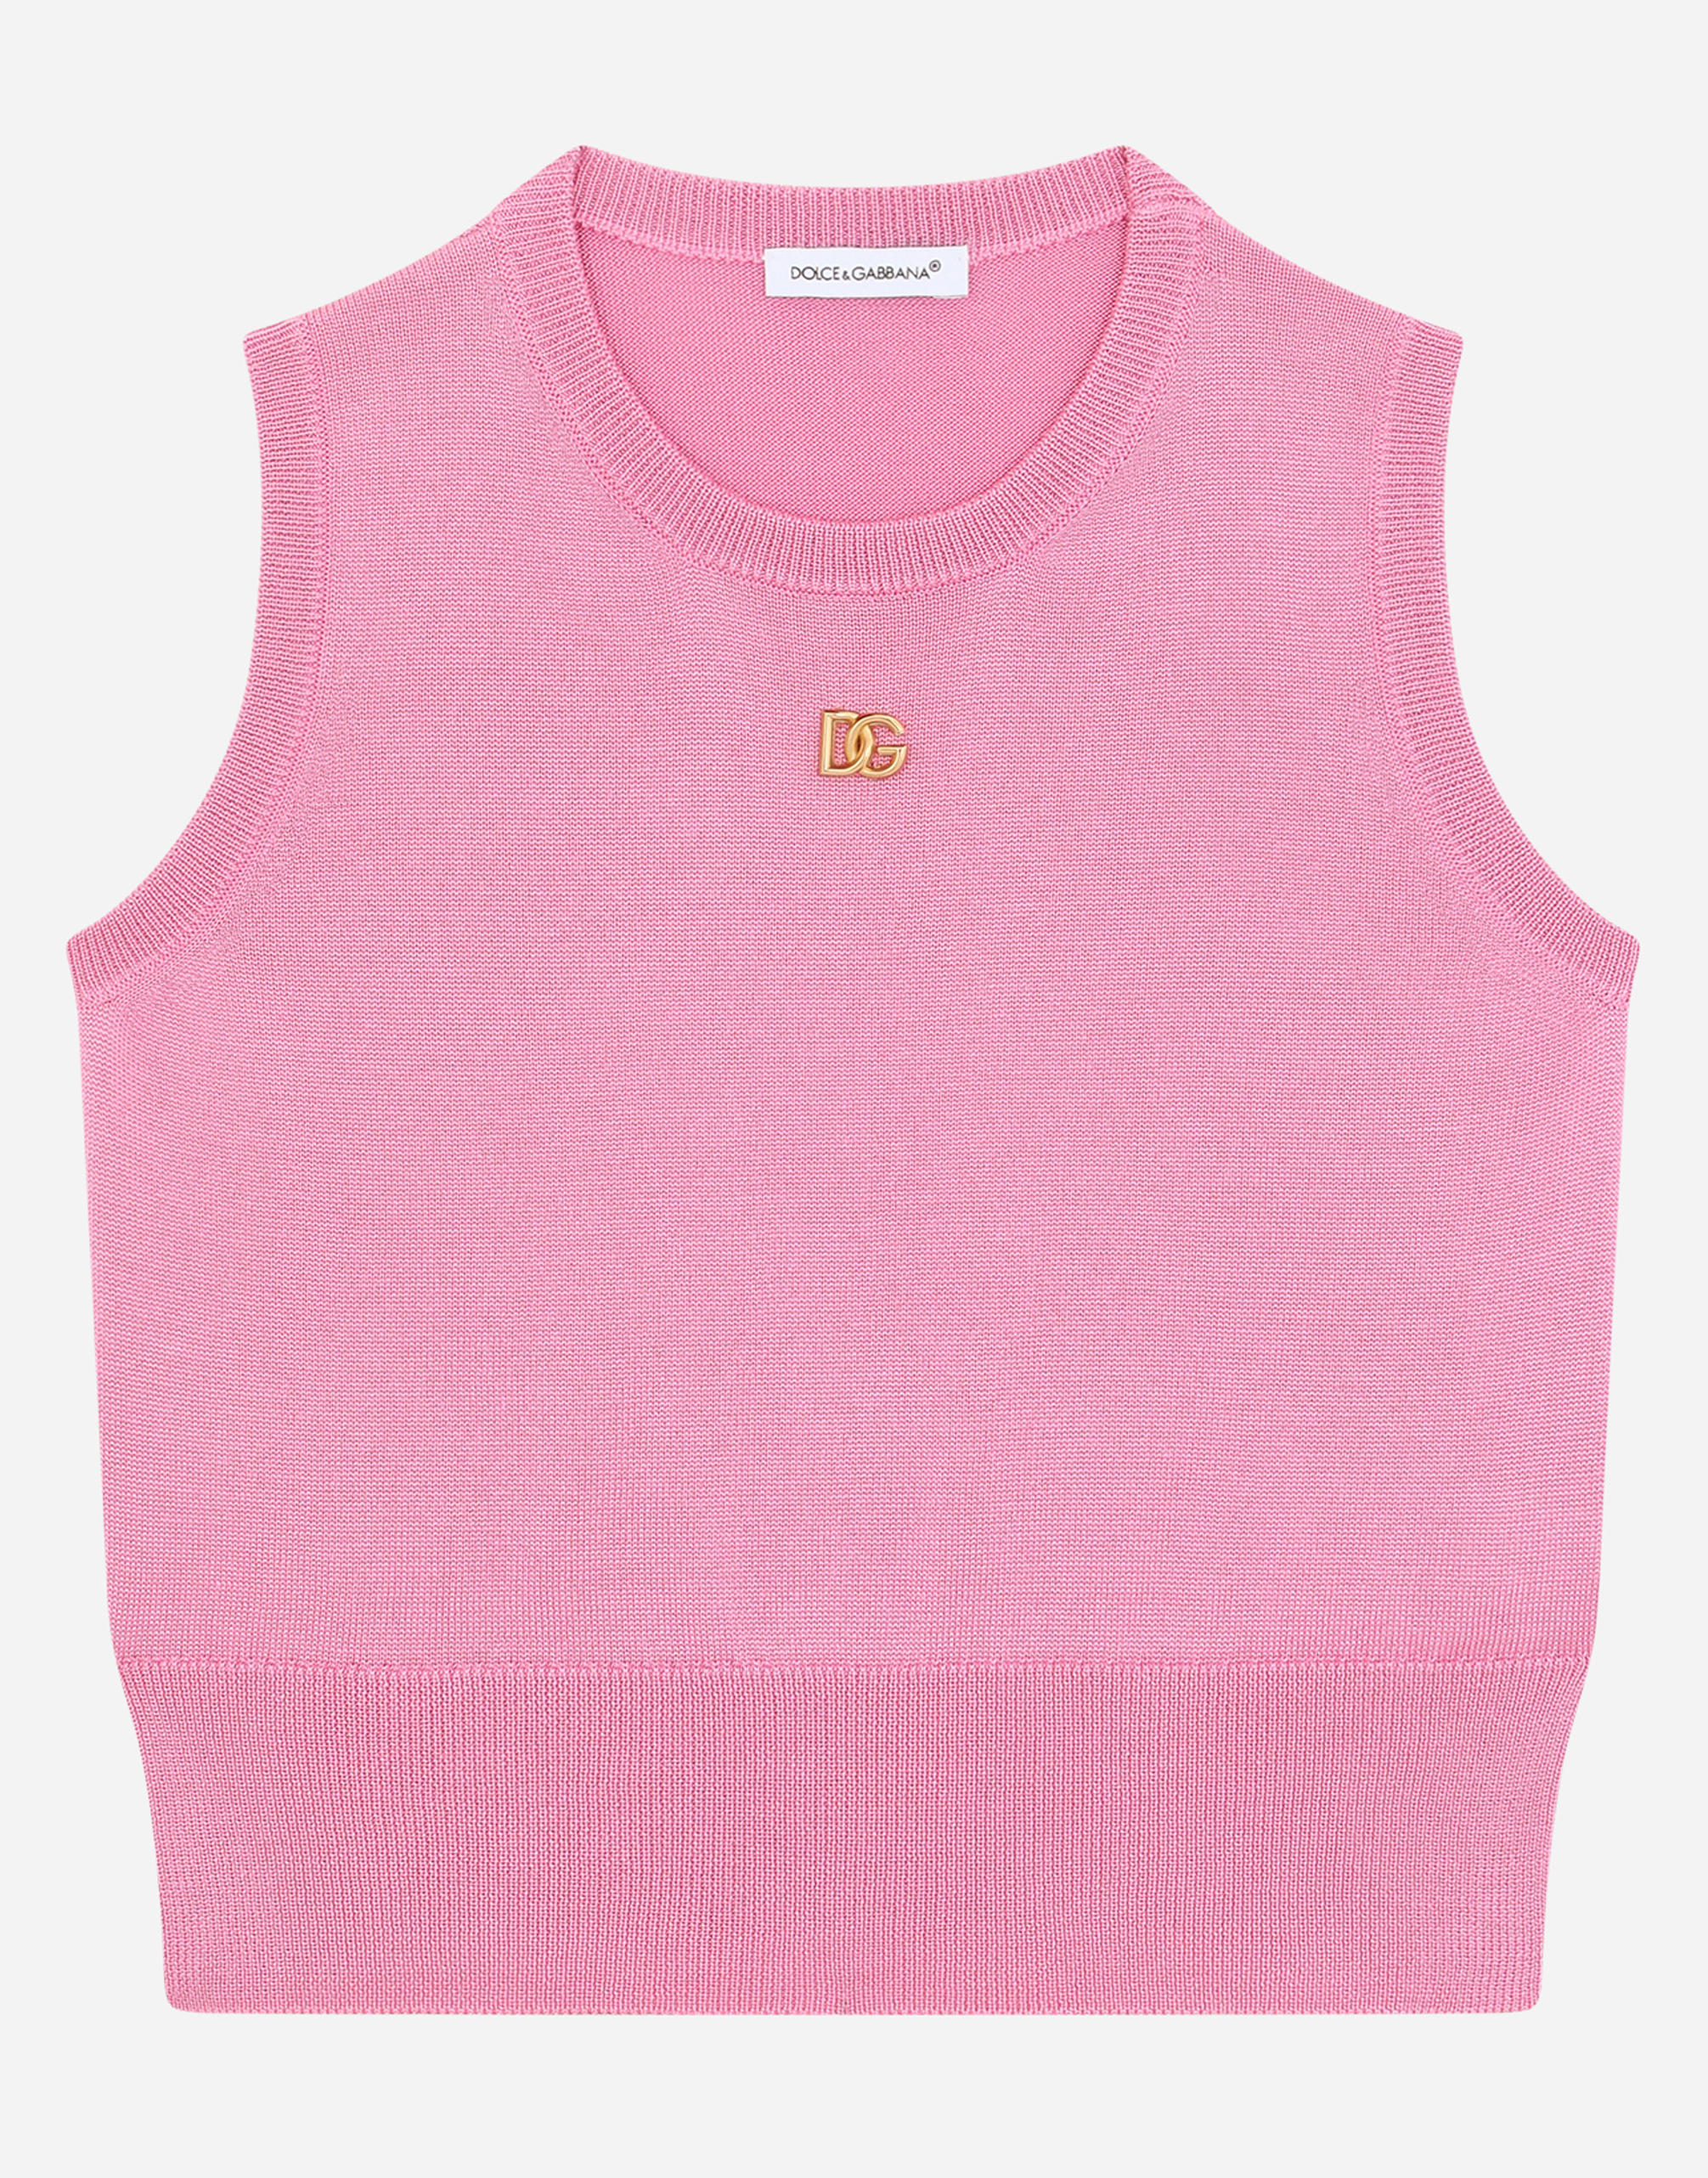 Silk vest with DG logo embroidery in Pink